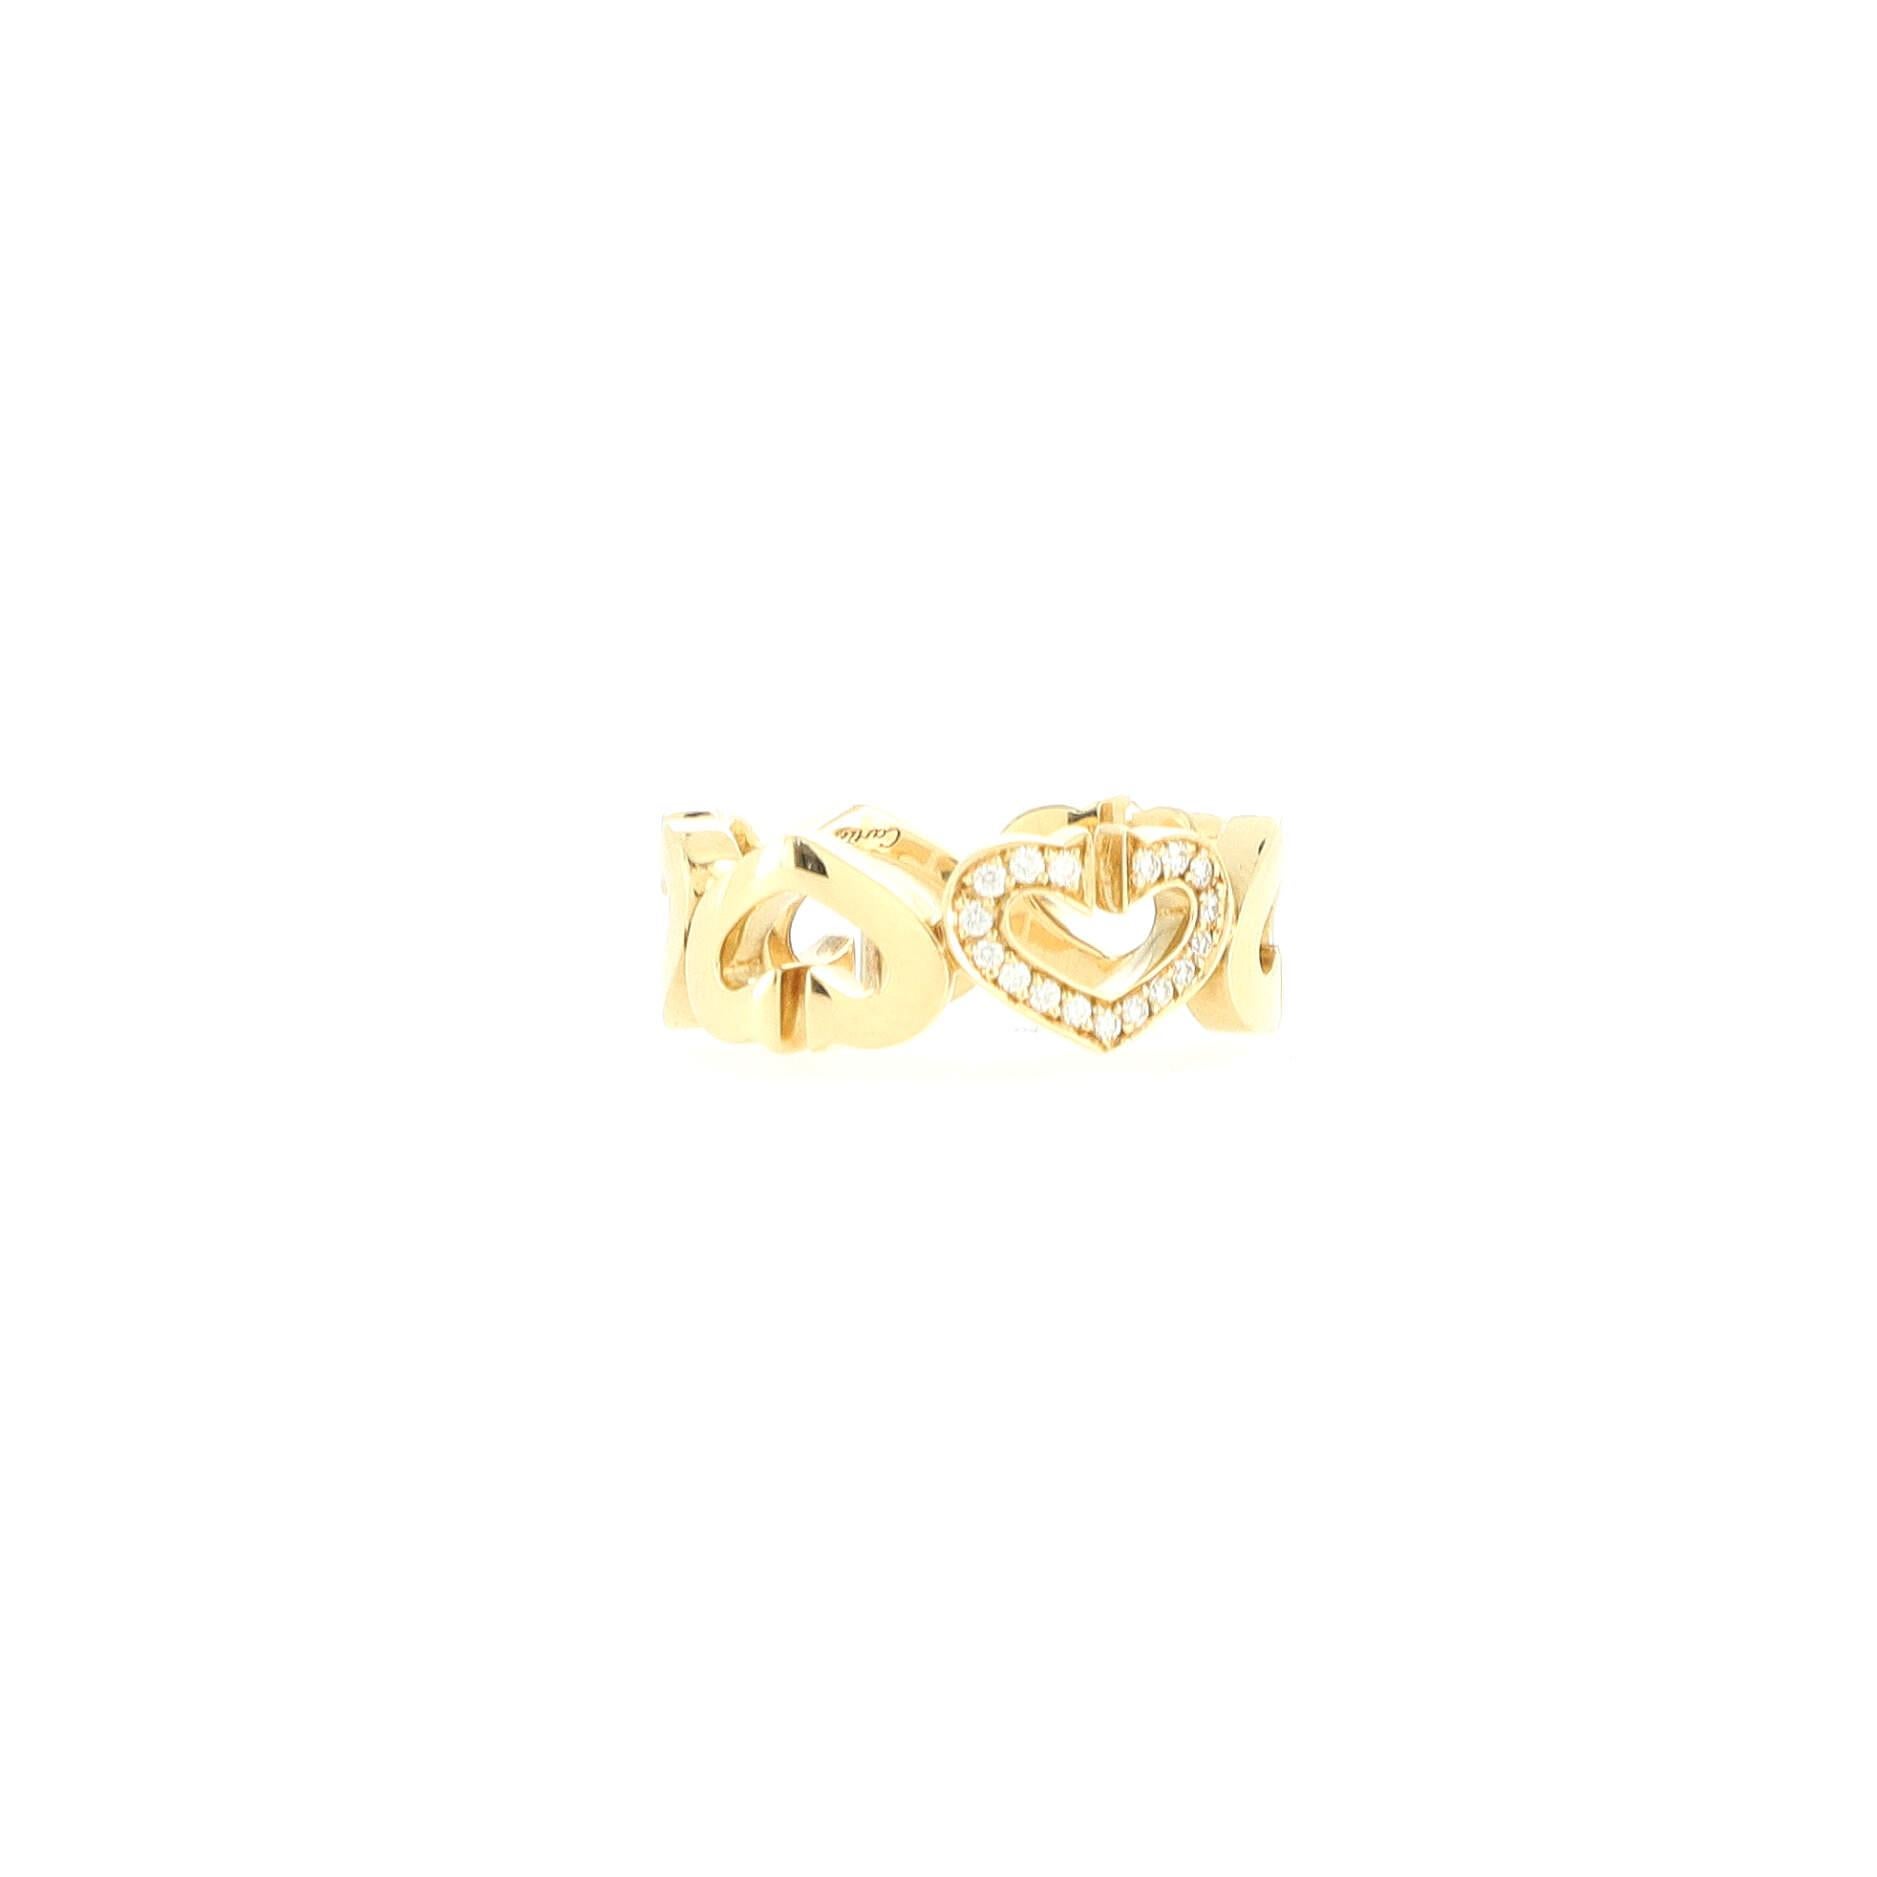 Condition: Very good. Moderate wear throughout.
Accessories: No Accessories
Measurements: Size: 5.75 - 51, Width: 7.35 mm
Designer: Cartier
Model: C Heart de Cartier Ring 18K Rose Gold and Diamonds
Exterior Color: Yellow Gold
Item Number: 159680/397